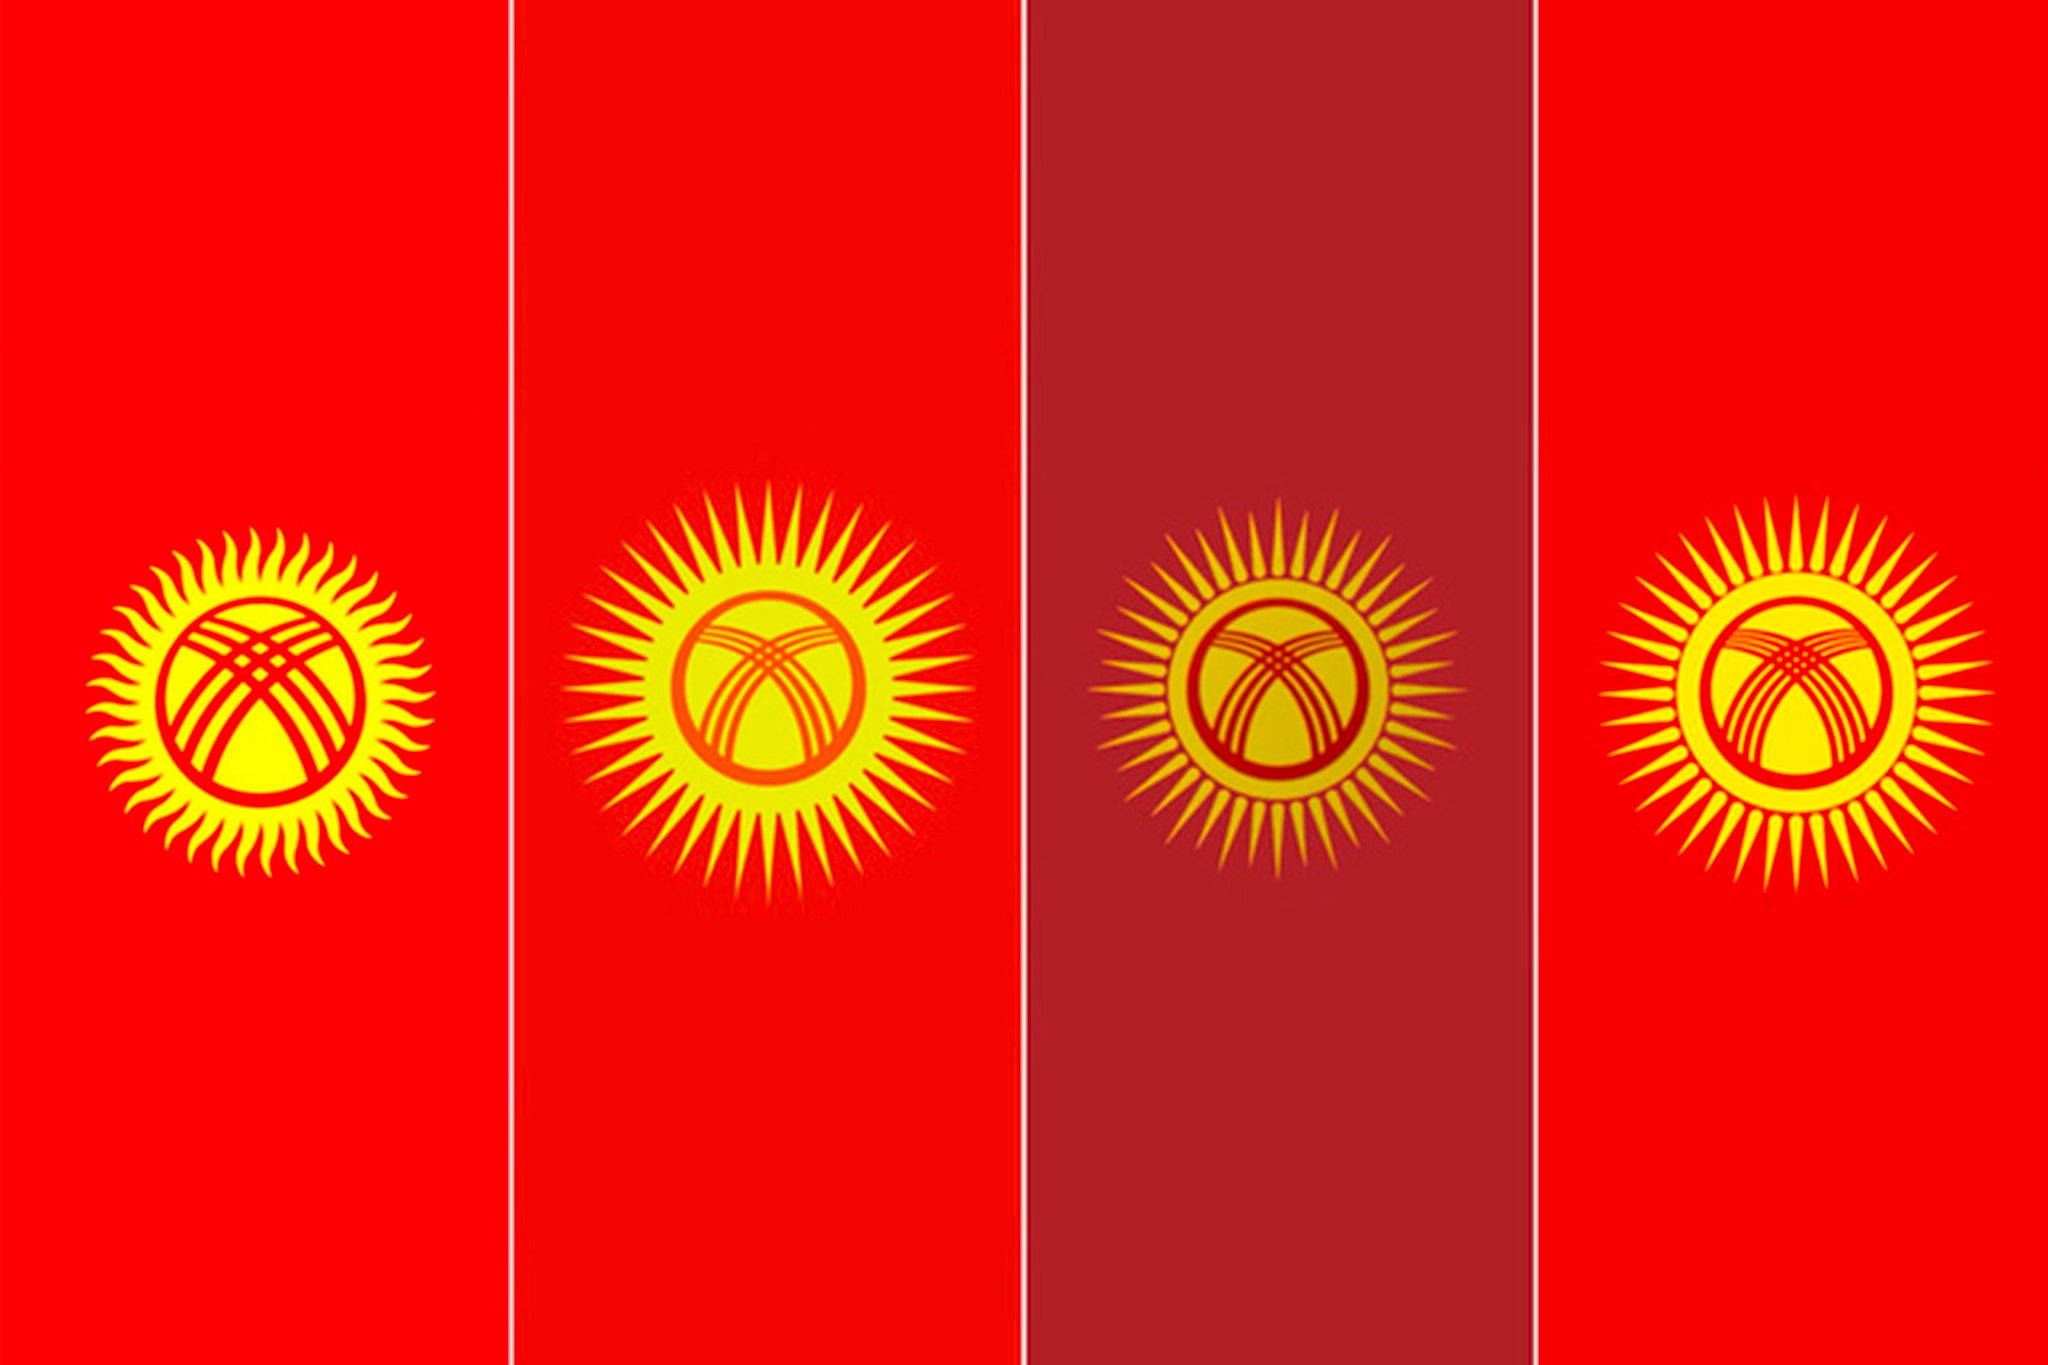 The flag of Kyrgyzstan (first from left), and ones proposed by MPs